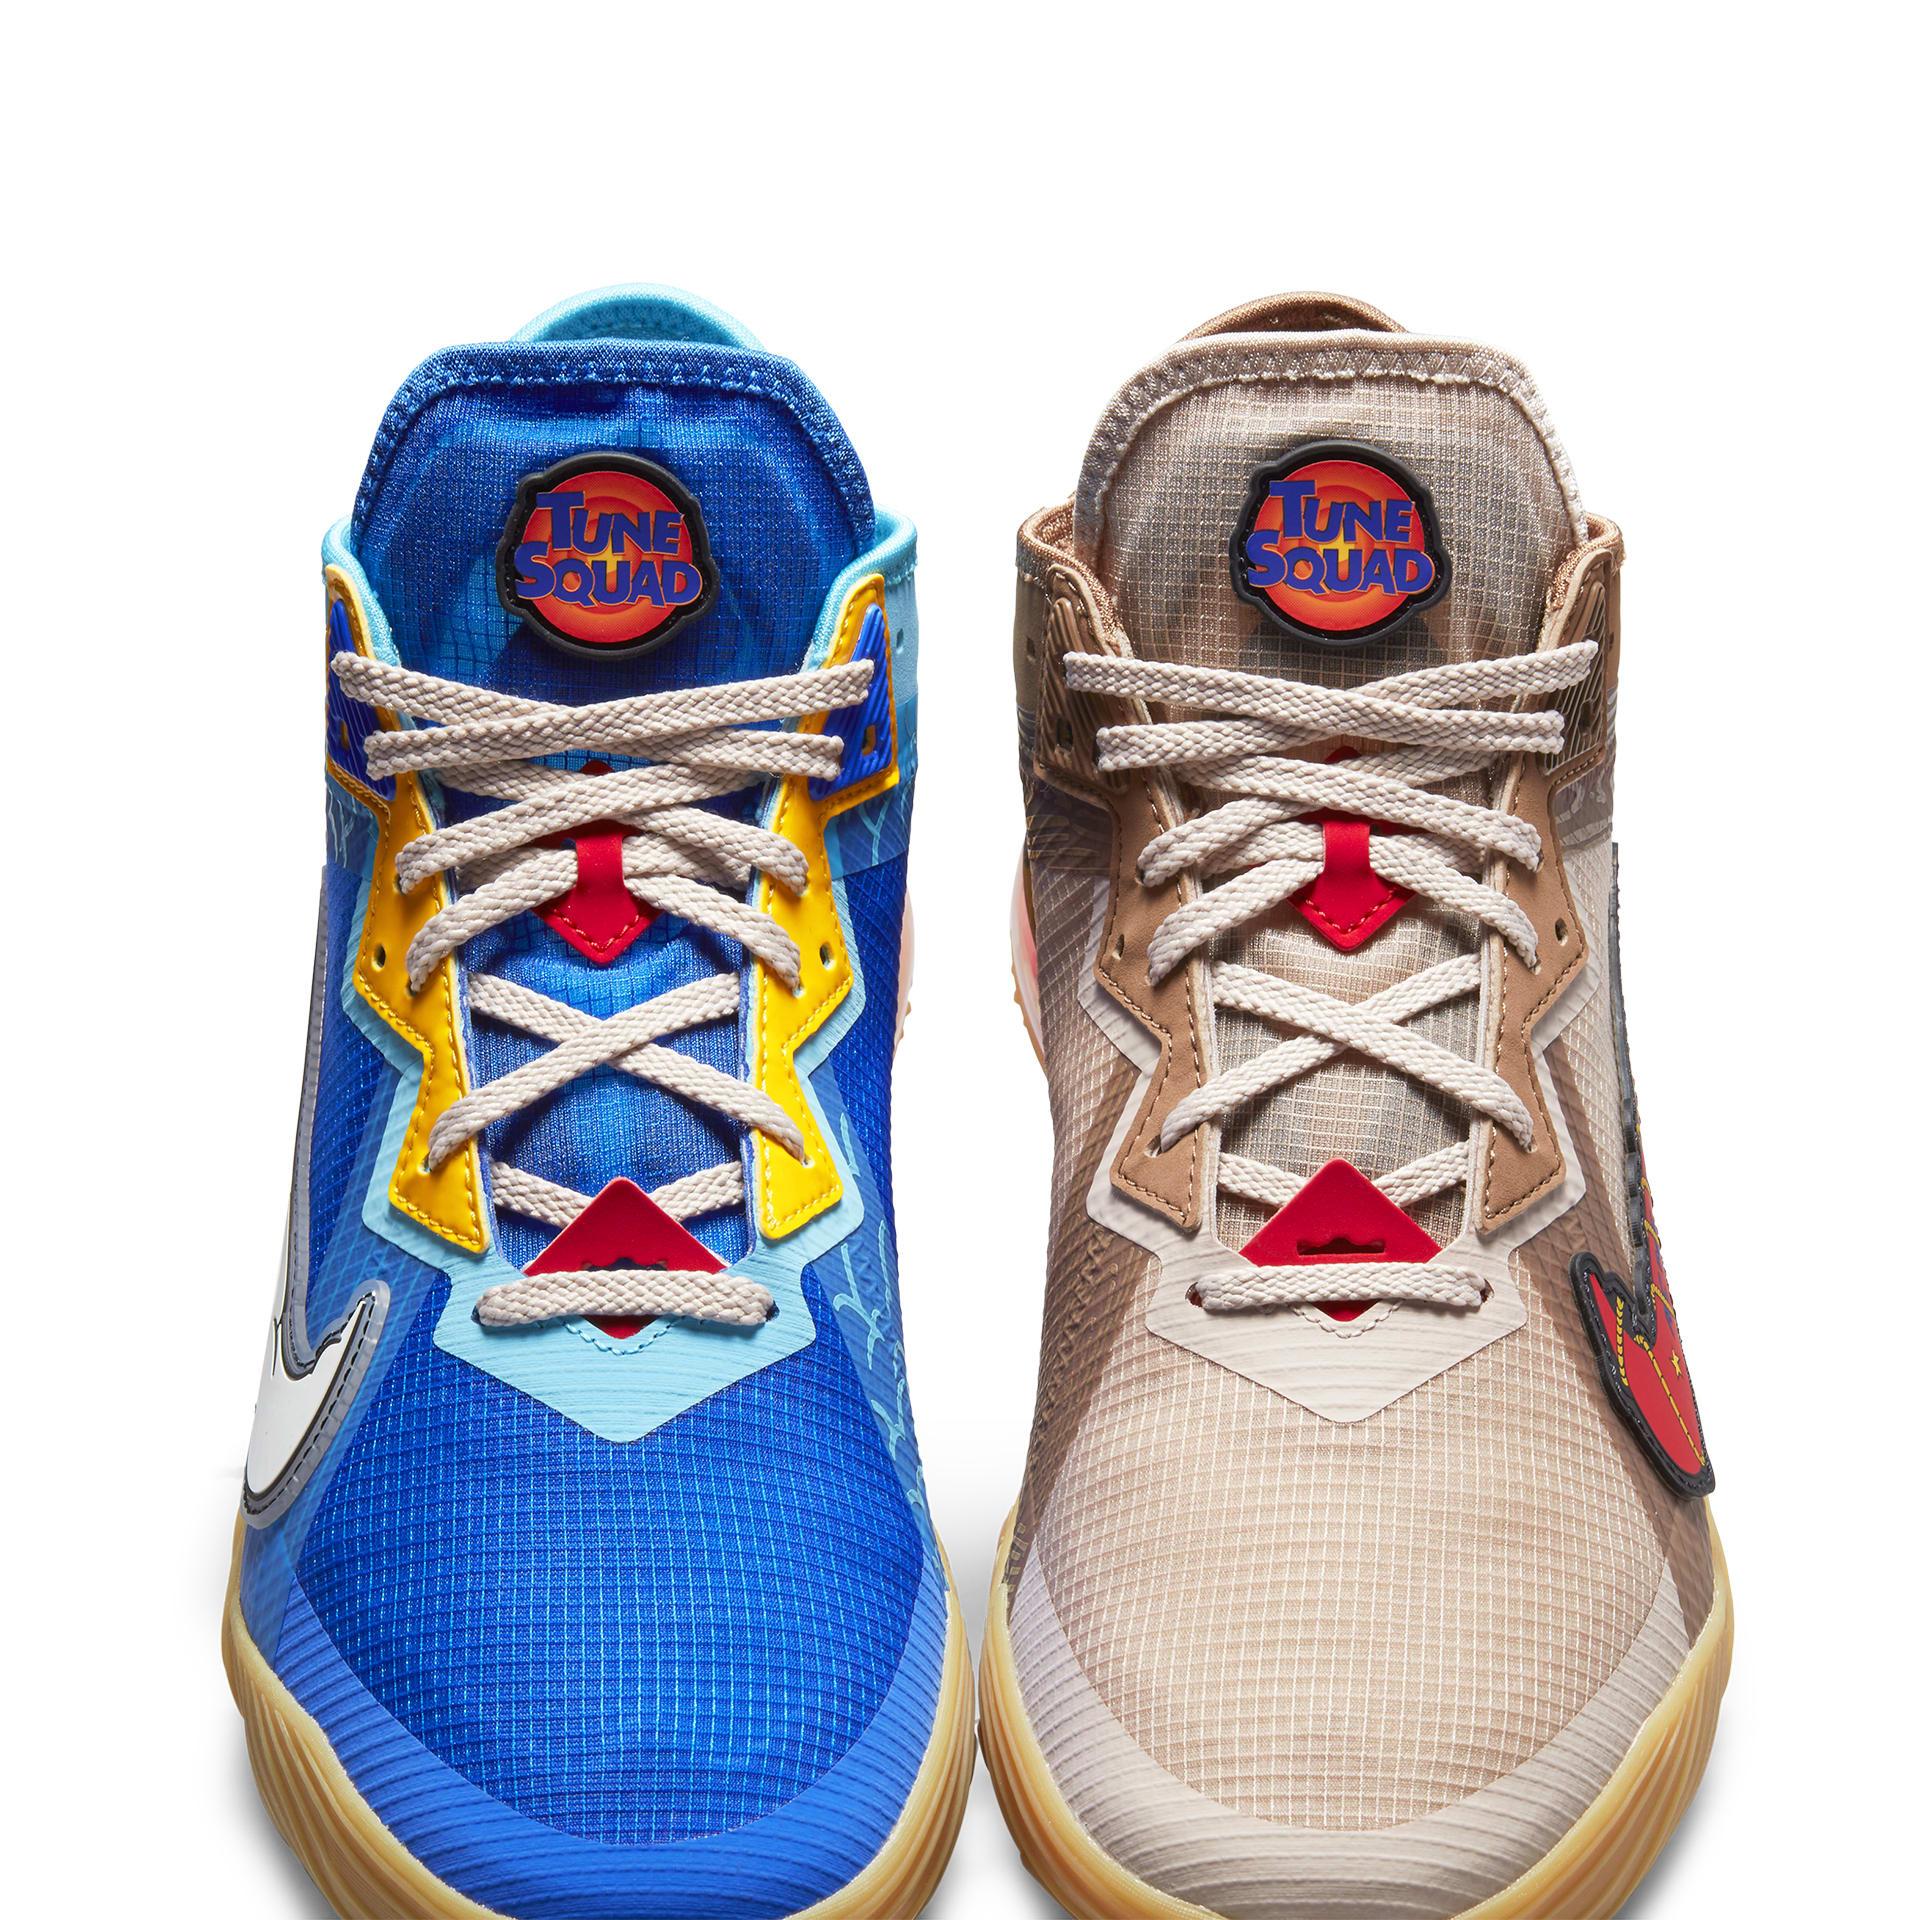 Road Runner vs. Wile E. Coyote LeBron 18 Low